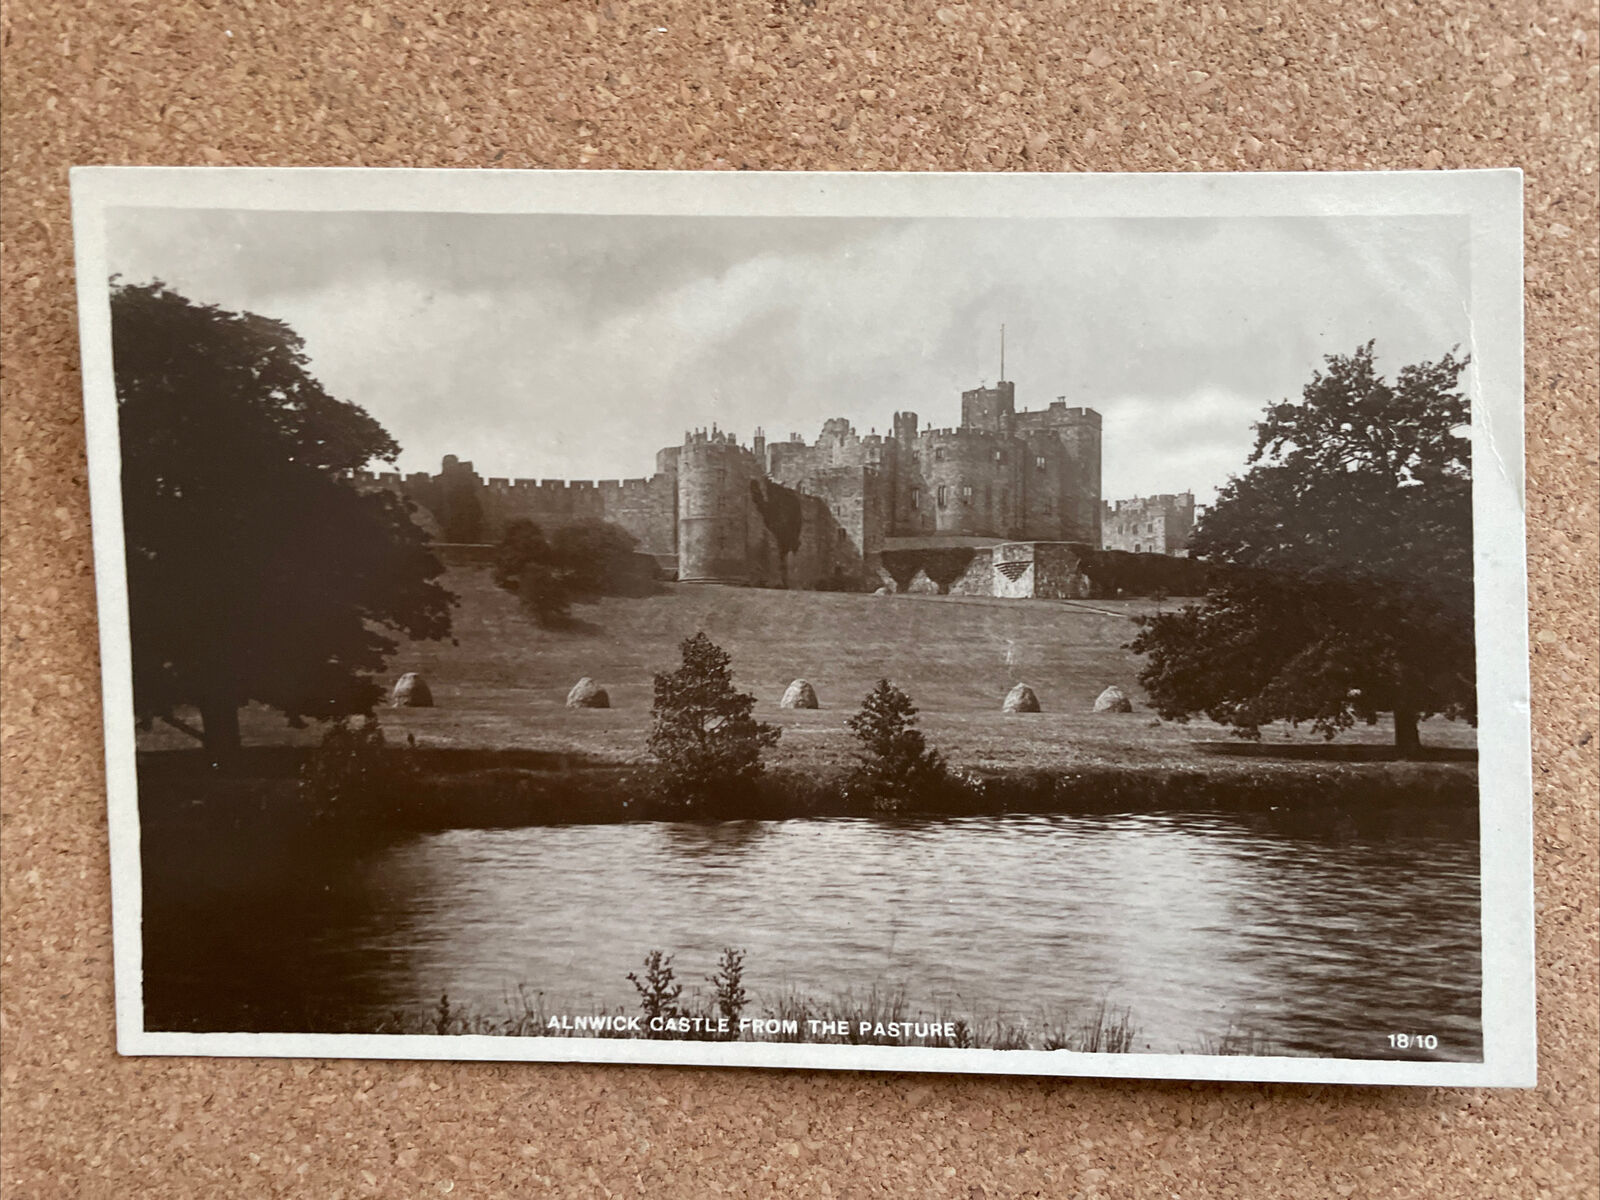 House Clearance - Alnwick Castle From The Pasture